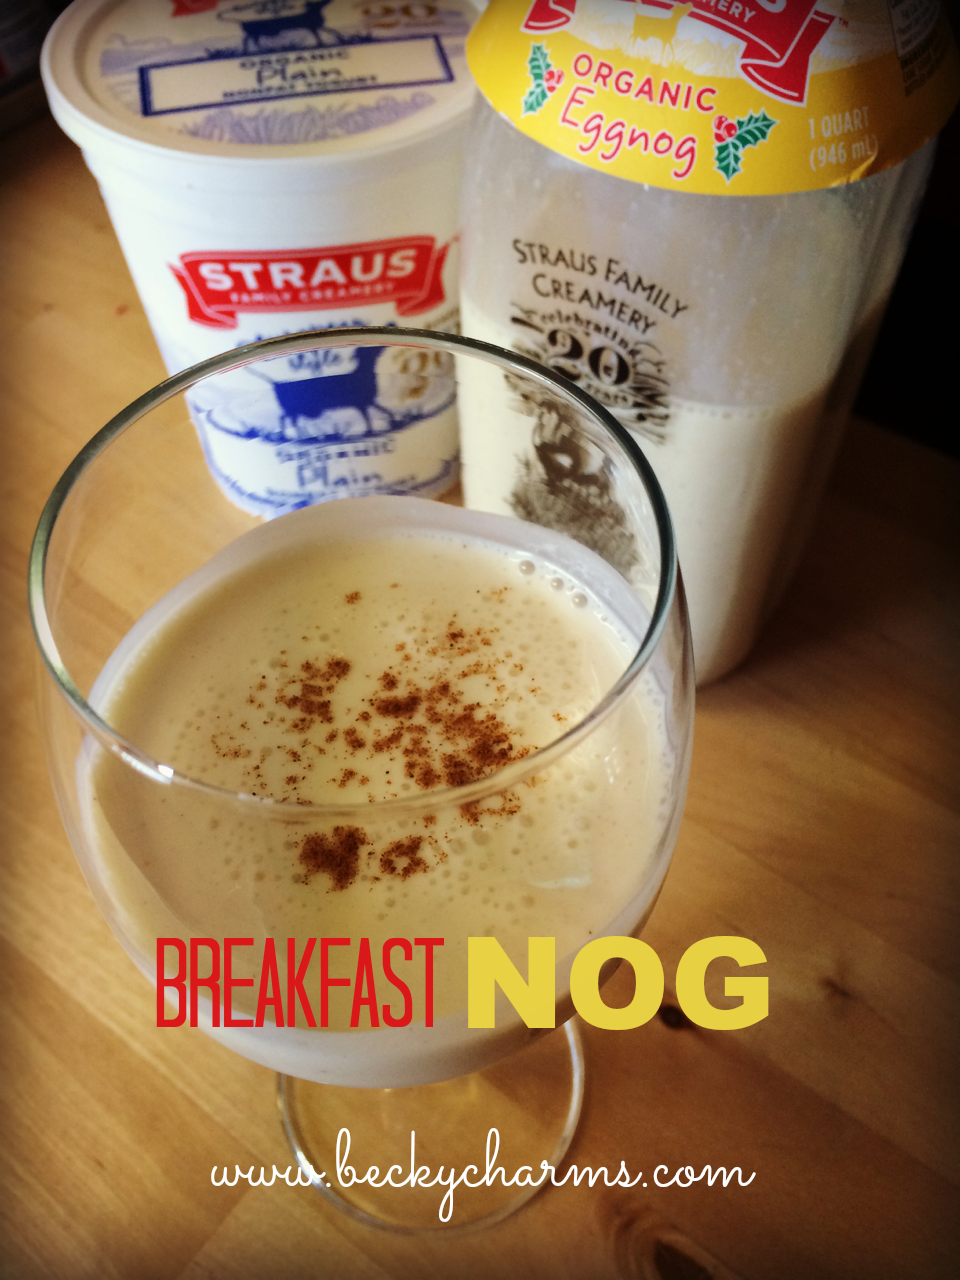 Breakfast Nog by BeckyCharms & Co.